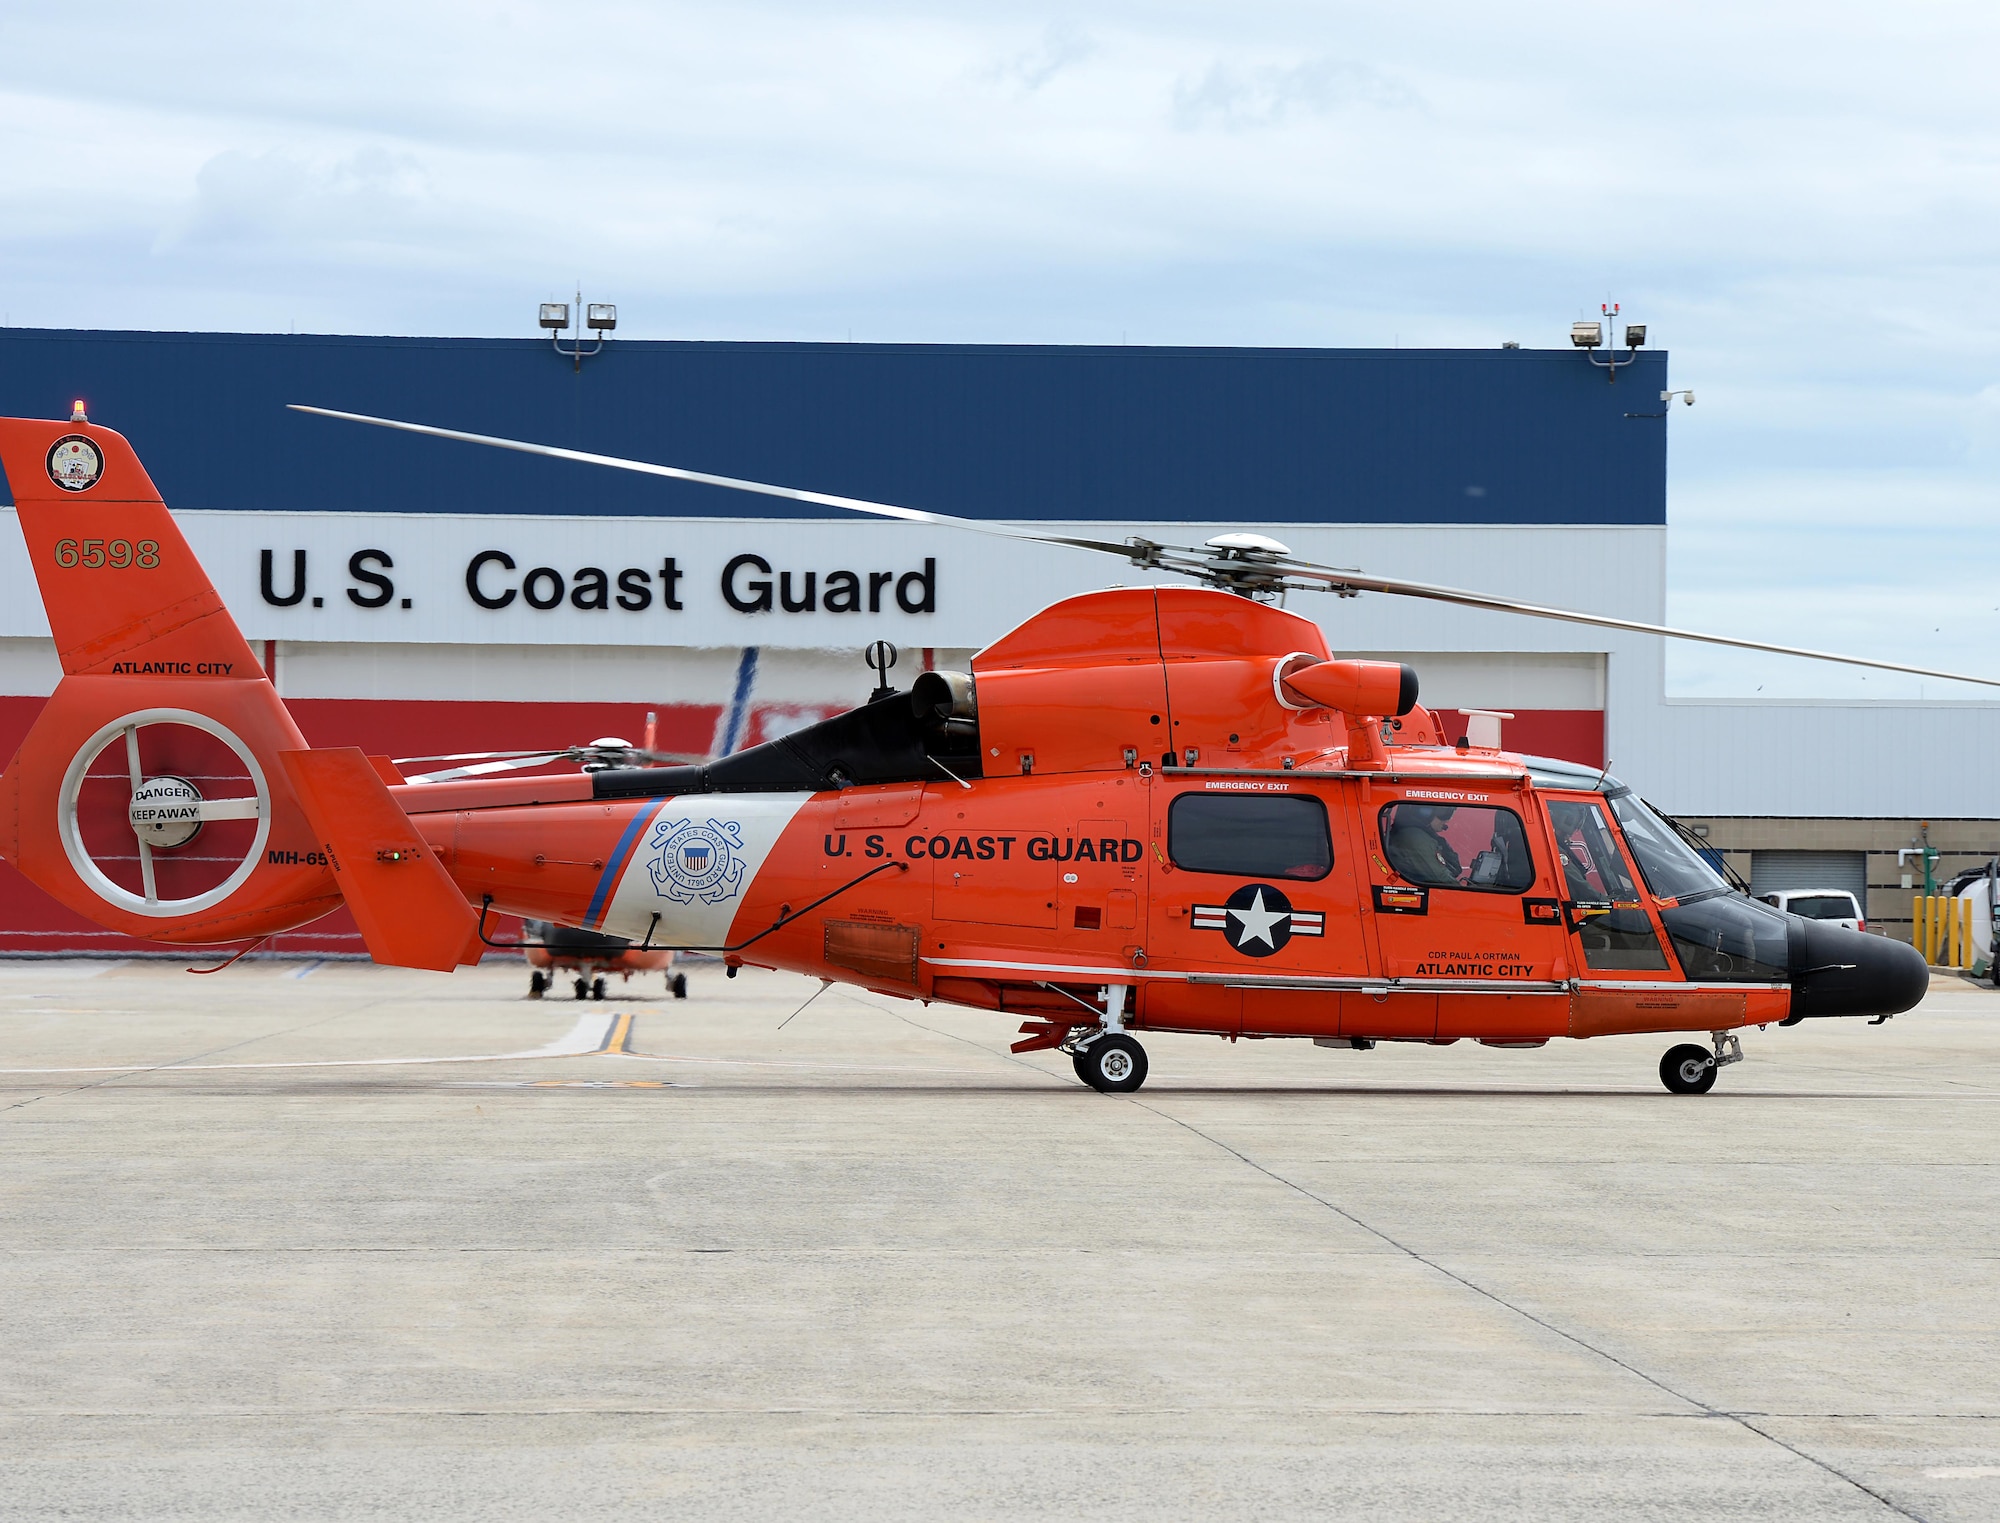 A U.S. Coast Guard HH-65C Dolphin Helicopter prepares to take off for an alert during a Cross Tell training exercise at the Atlantic City International Airport, N.J., May 24, 2017. Air National units from New Jersey, South Carolina and Washington D.C. participated in training and familiarization exercises with the U.S. Coast Guard and Civil Air Patrol during the three-day CrossTell to increase awareness of the Aerospace Control Alert mission. (U.S. Air National Guard photo by Airman 1st Class Cristina J. Allen/Released)